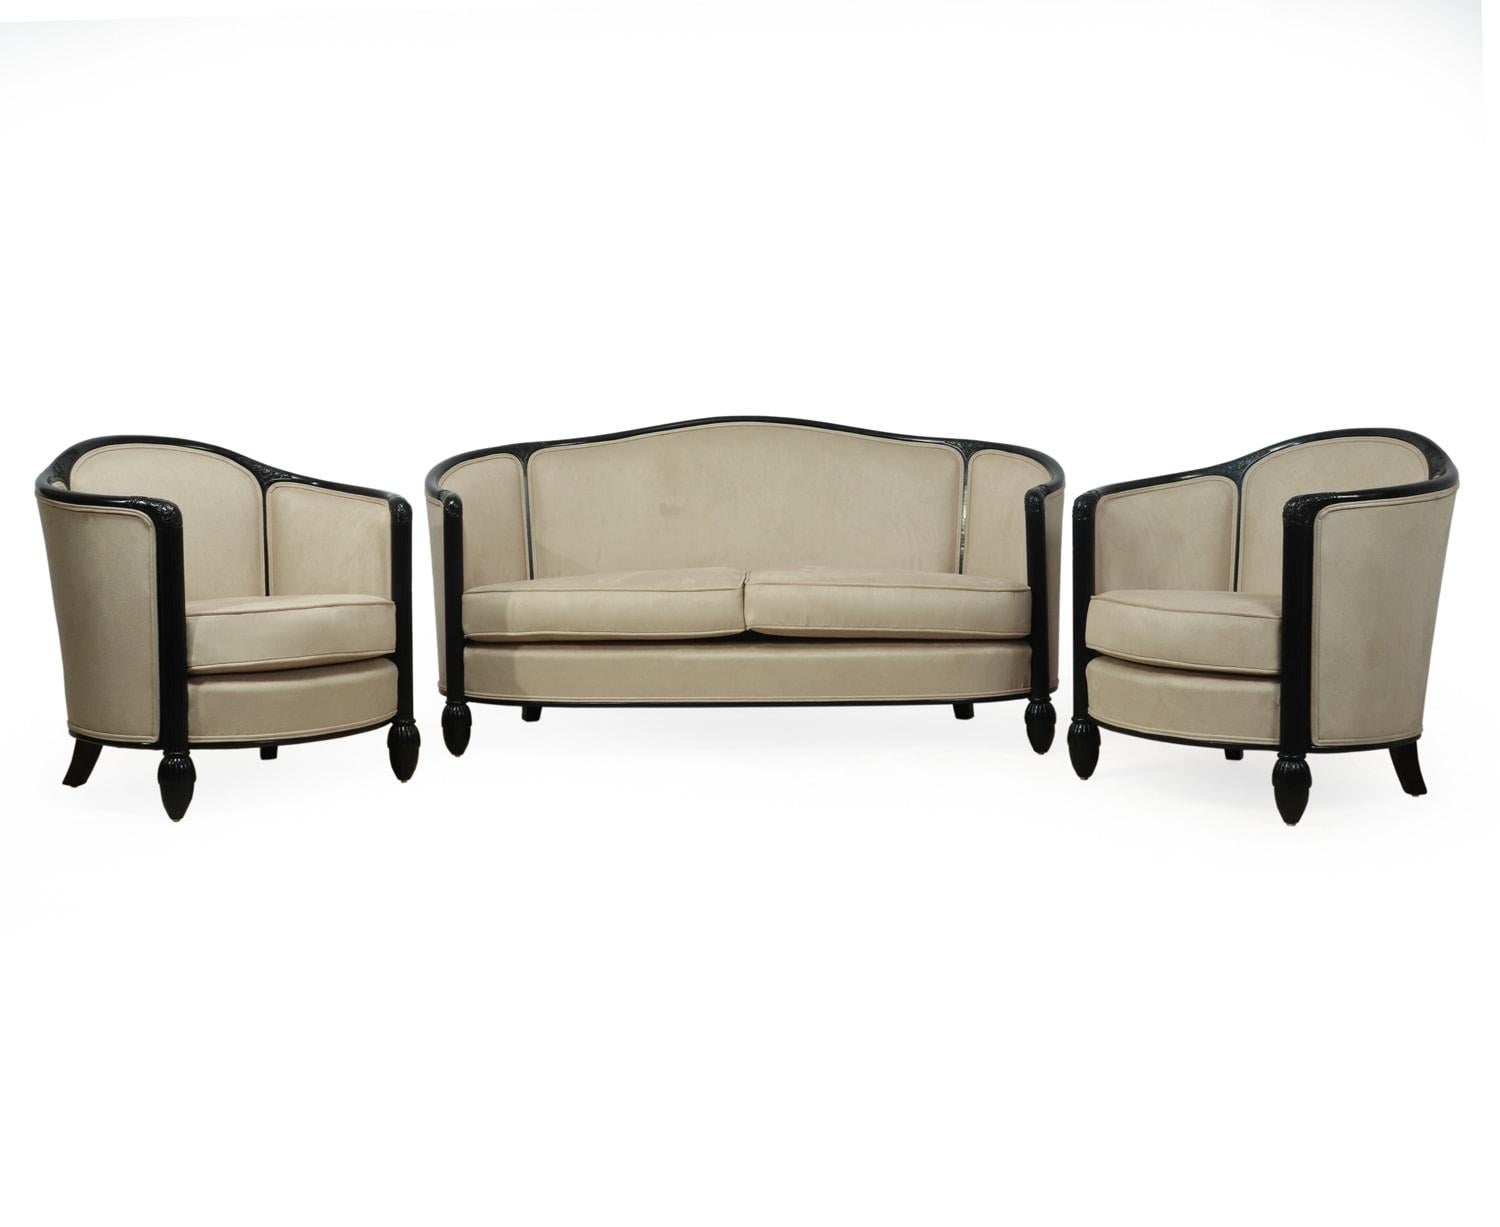 French Art Deco chairs and sofa by Paul Follot c1920
A Pair of chairs and sofa in ebonised solid oak with reeded front leg and carved detail, the suite has been fully upholstered in faux suede that is stain resistant and crib 5 standard, the seats